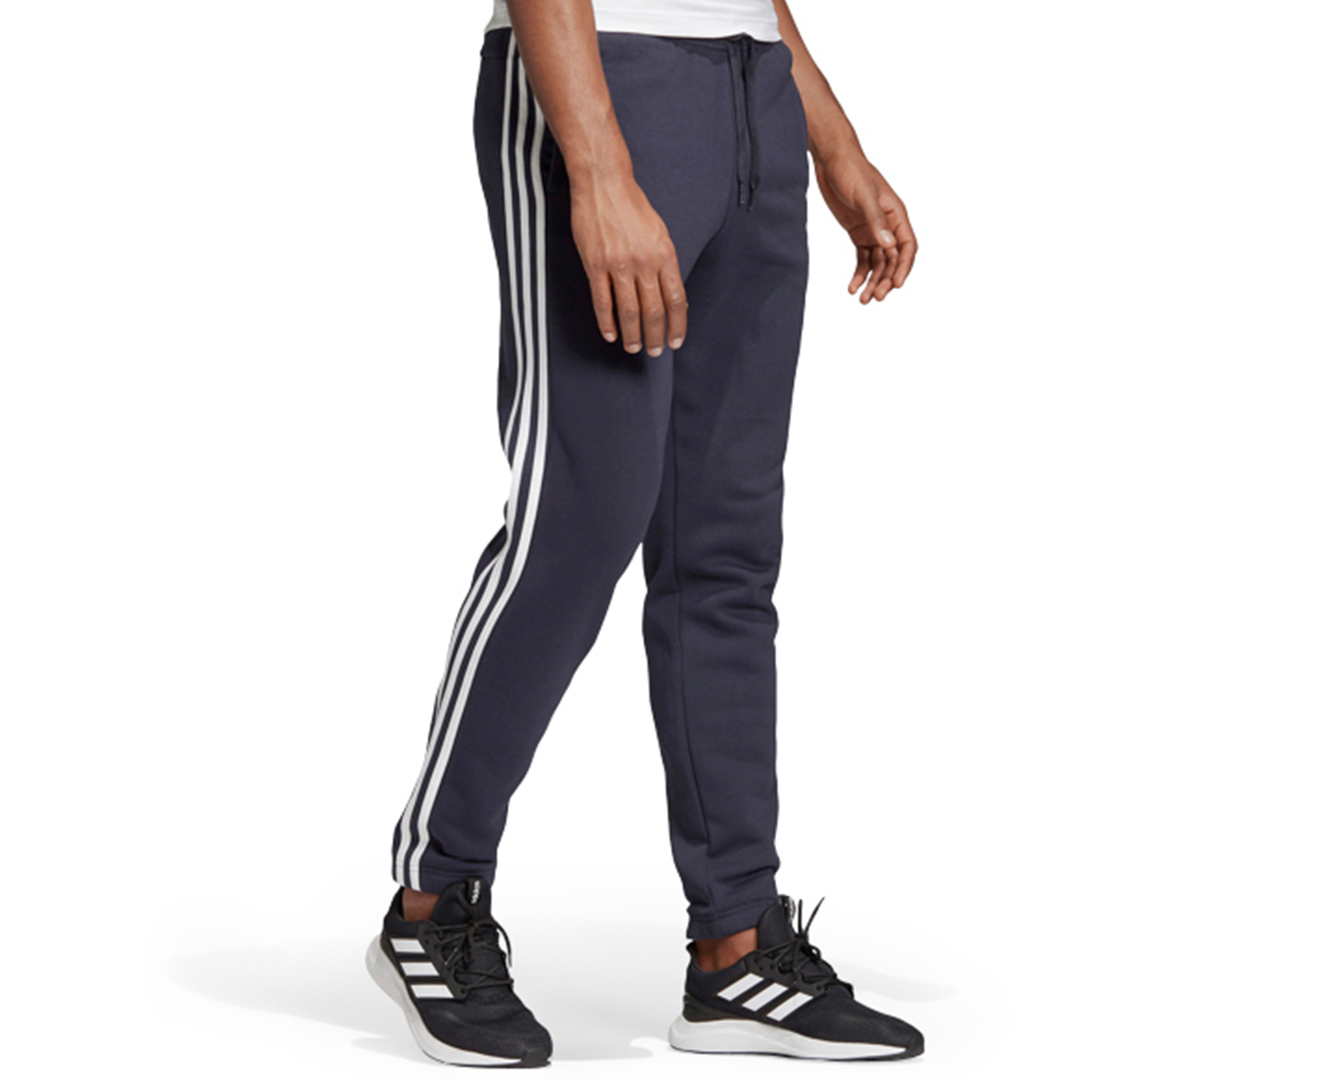 Adidas Men's Essentials 3-Stripes Tapered Cuffed Pants / Trackpants - Legend Ink/White | Catch 